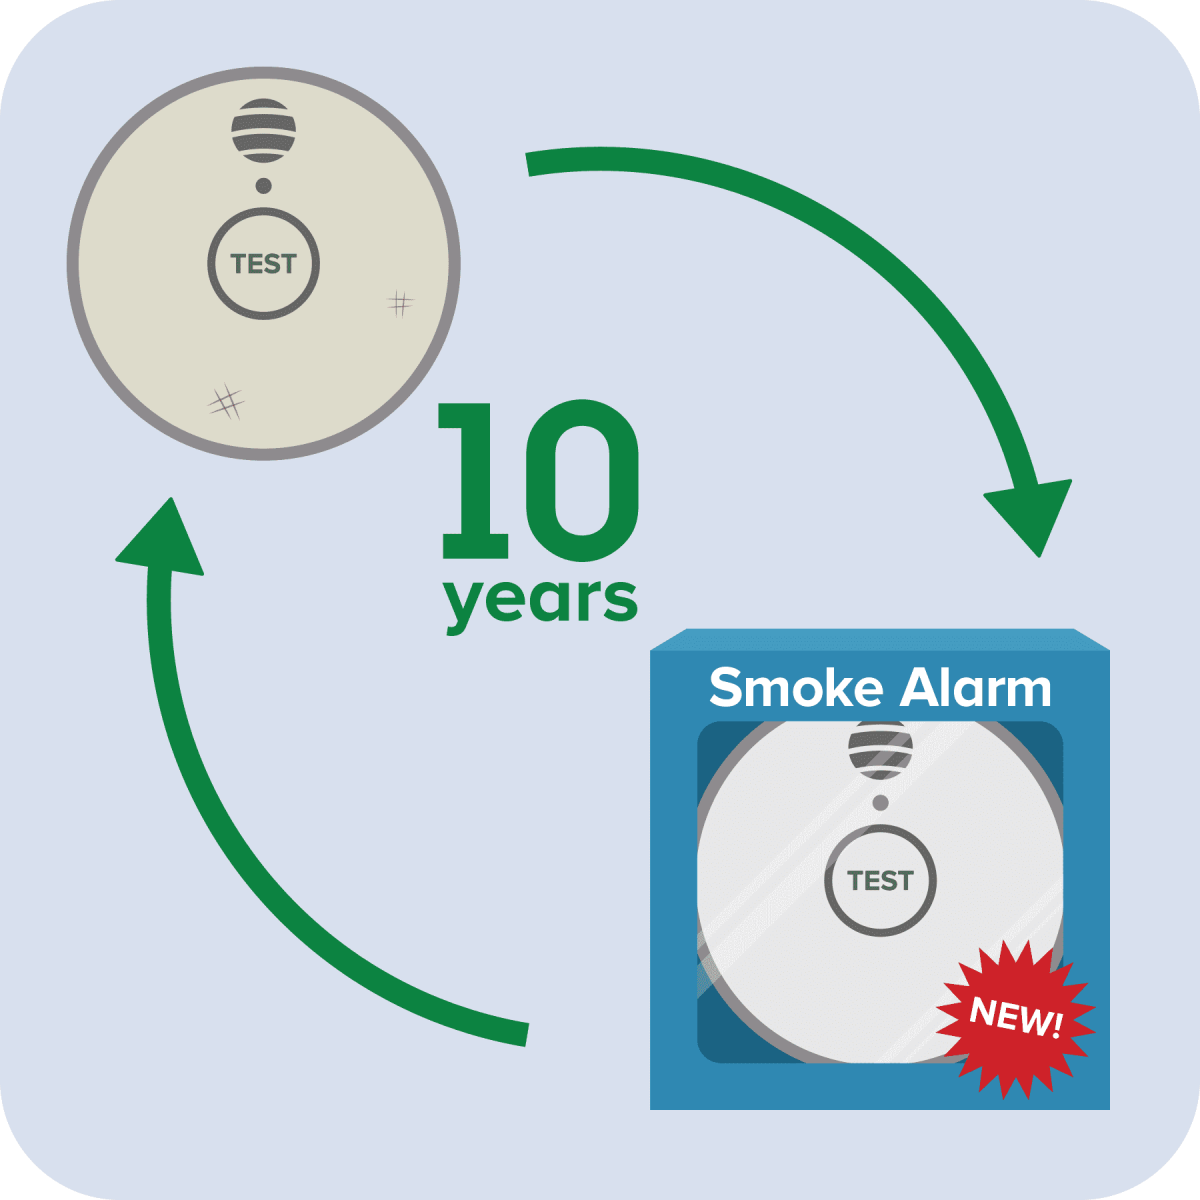 Old Smoke Alarm with arrows and 10 years pointing to new smoke alarm, pictogram courtesy of FEMA